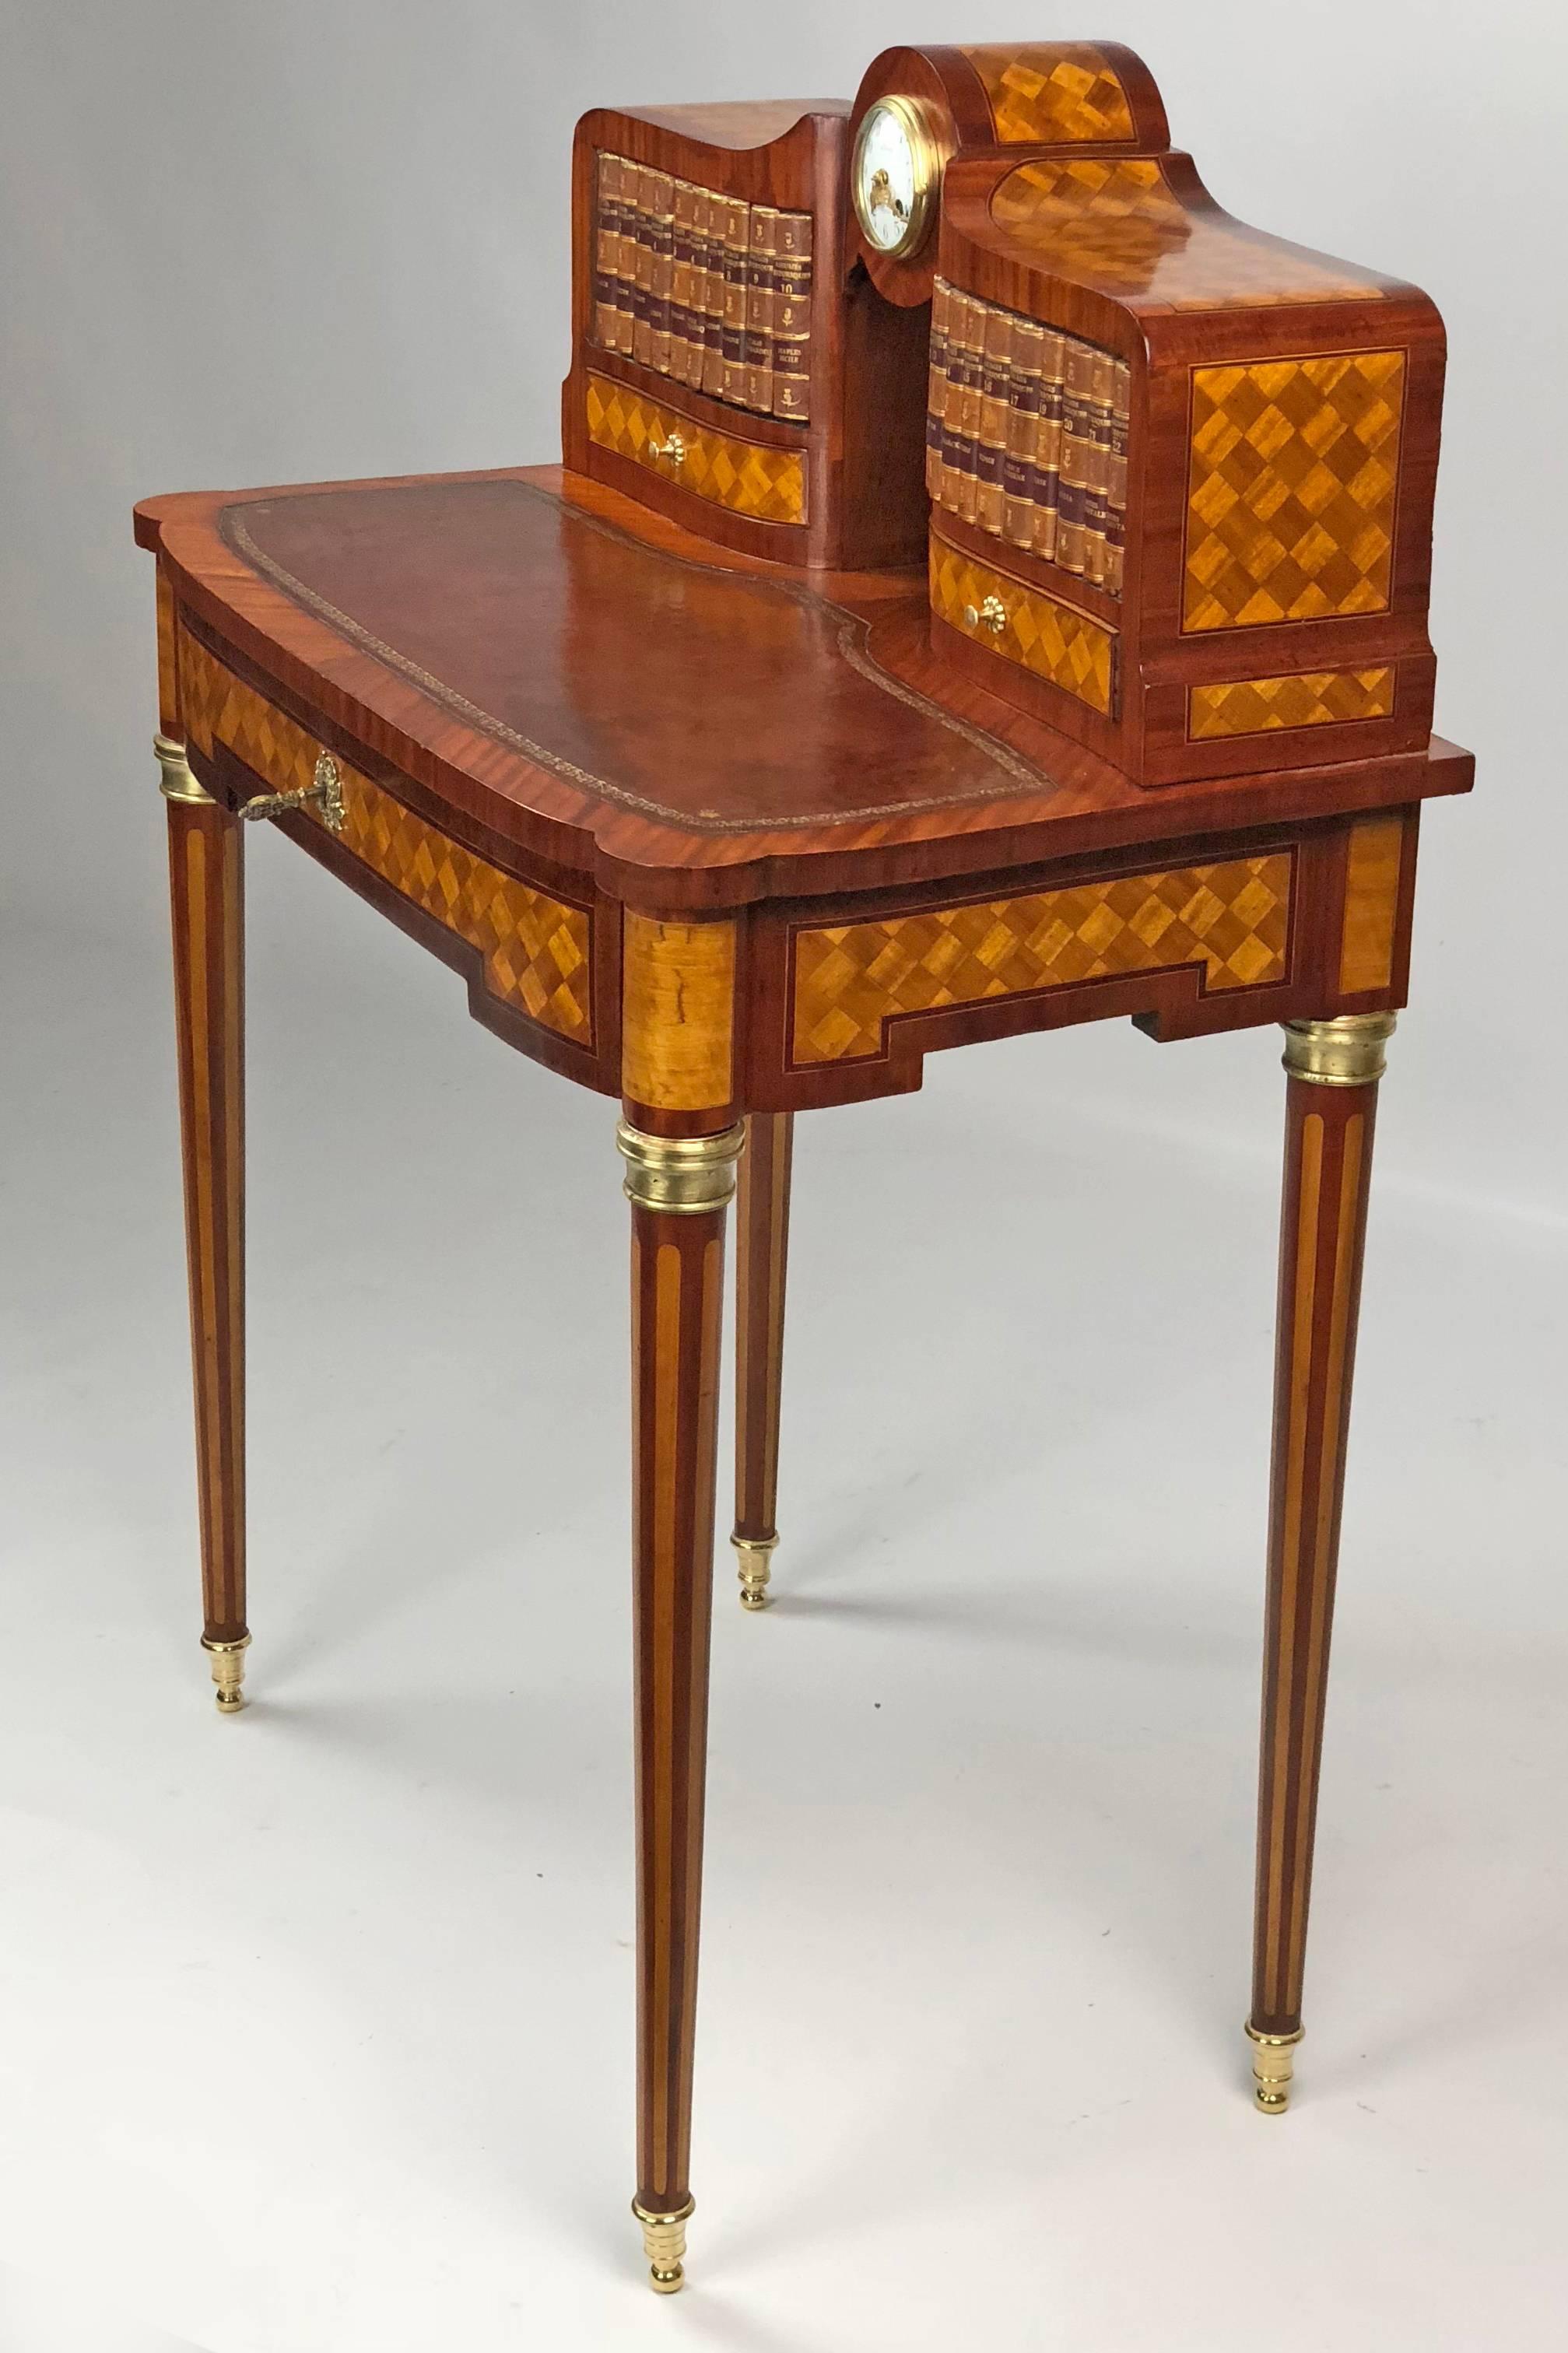 A jewel of a 19th century French Bonheur du Jour aka ladies' desk in mahogany, rosewood, kingwood and profuse parquetry inlay of satinwood.  Bow front and serpentine sides, it has a superstructure with 2 faux book doors that only open via hidden